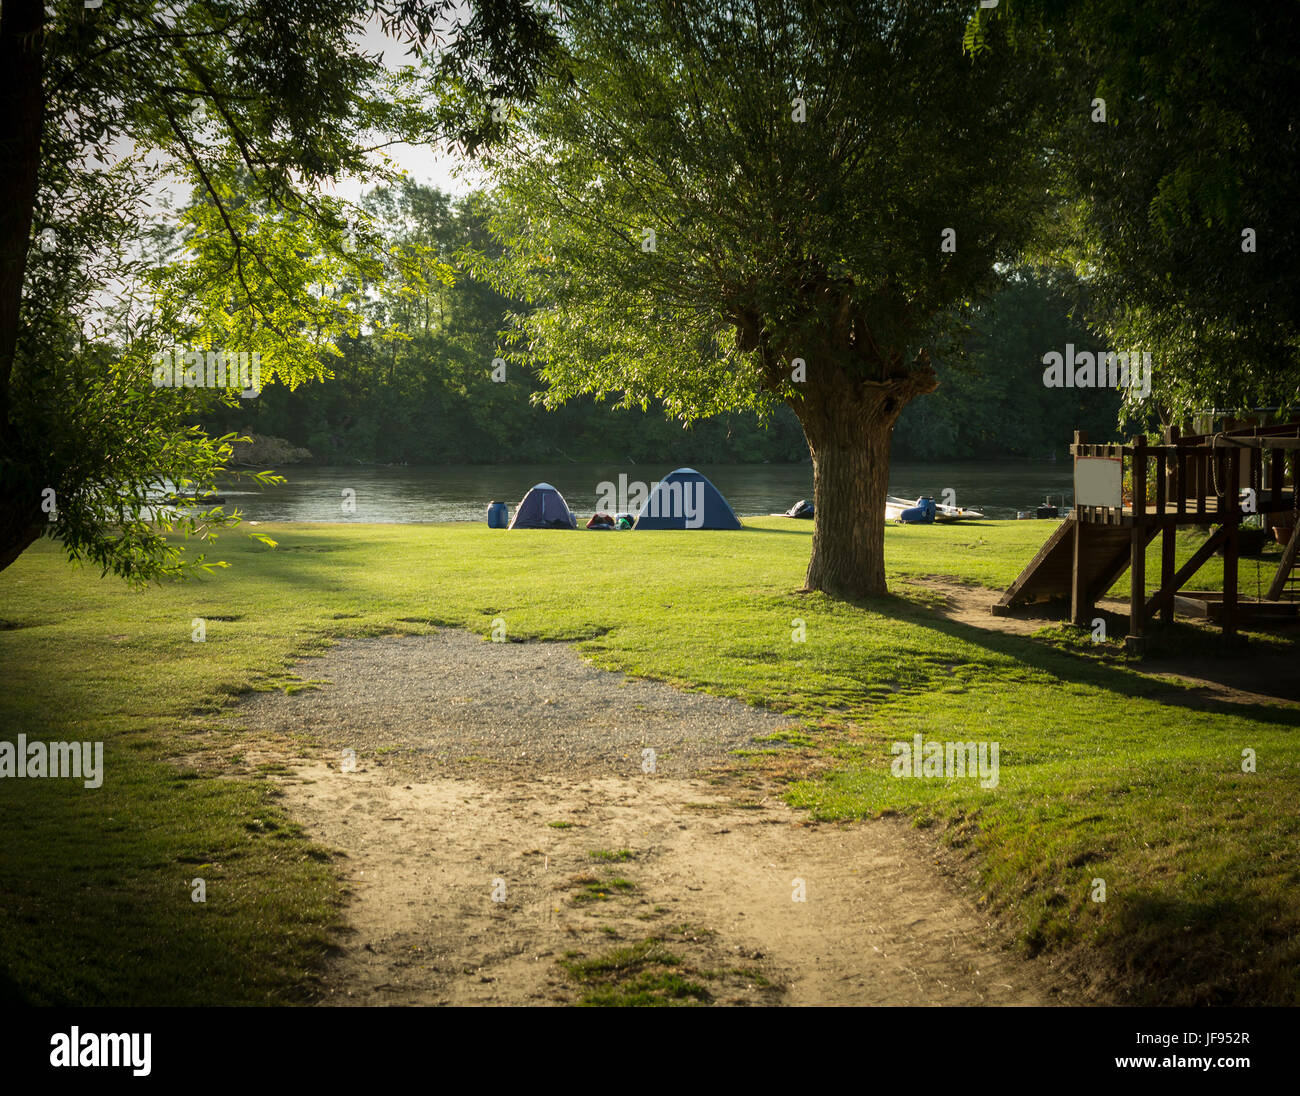 road leading to tourist camp with tents Stock Photo